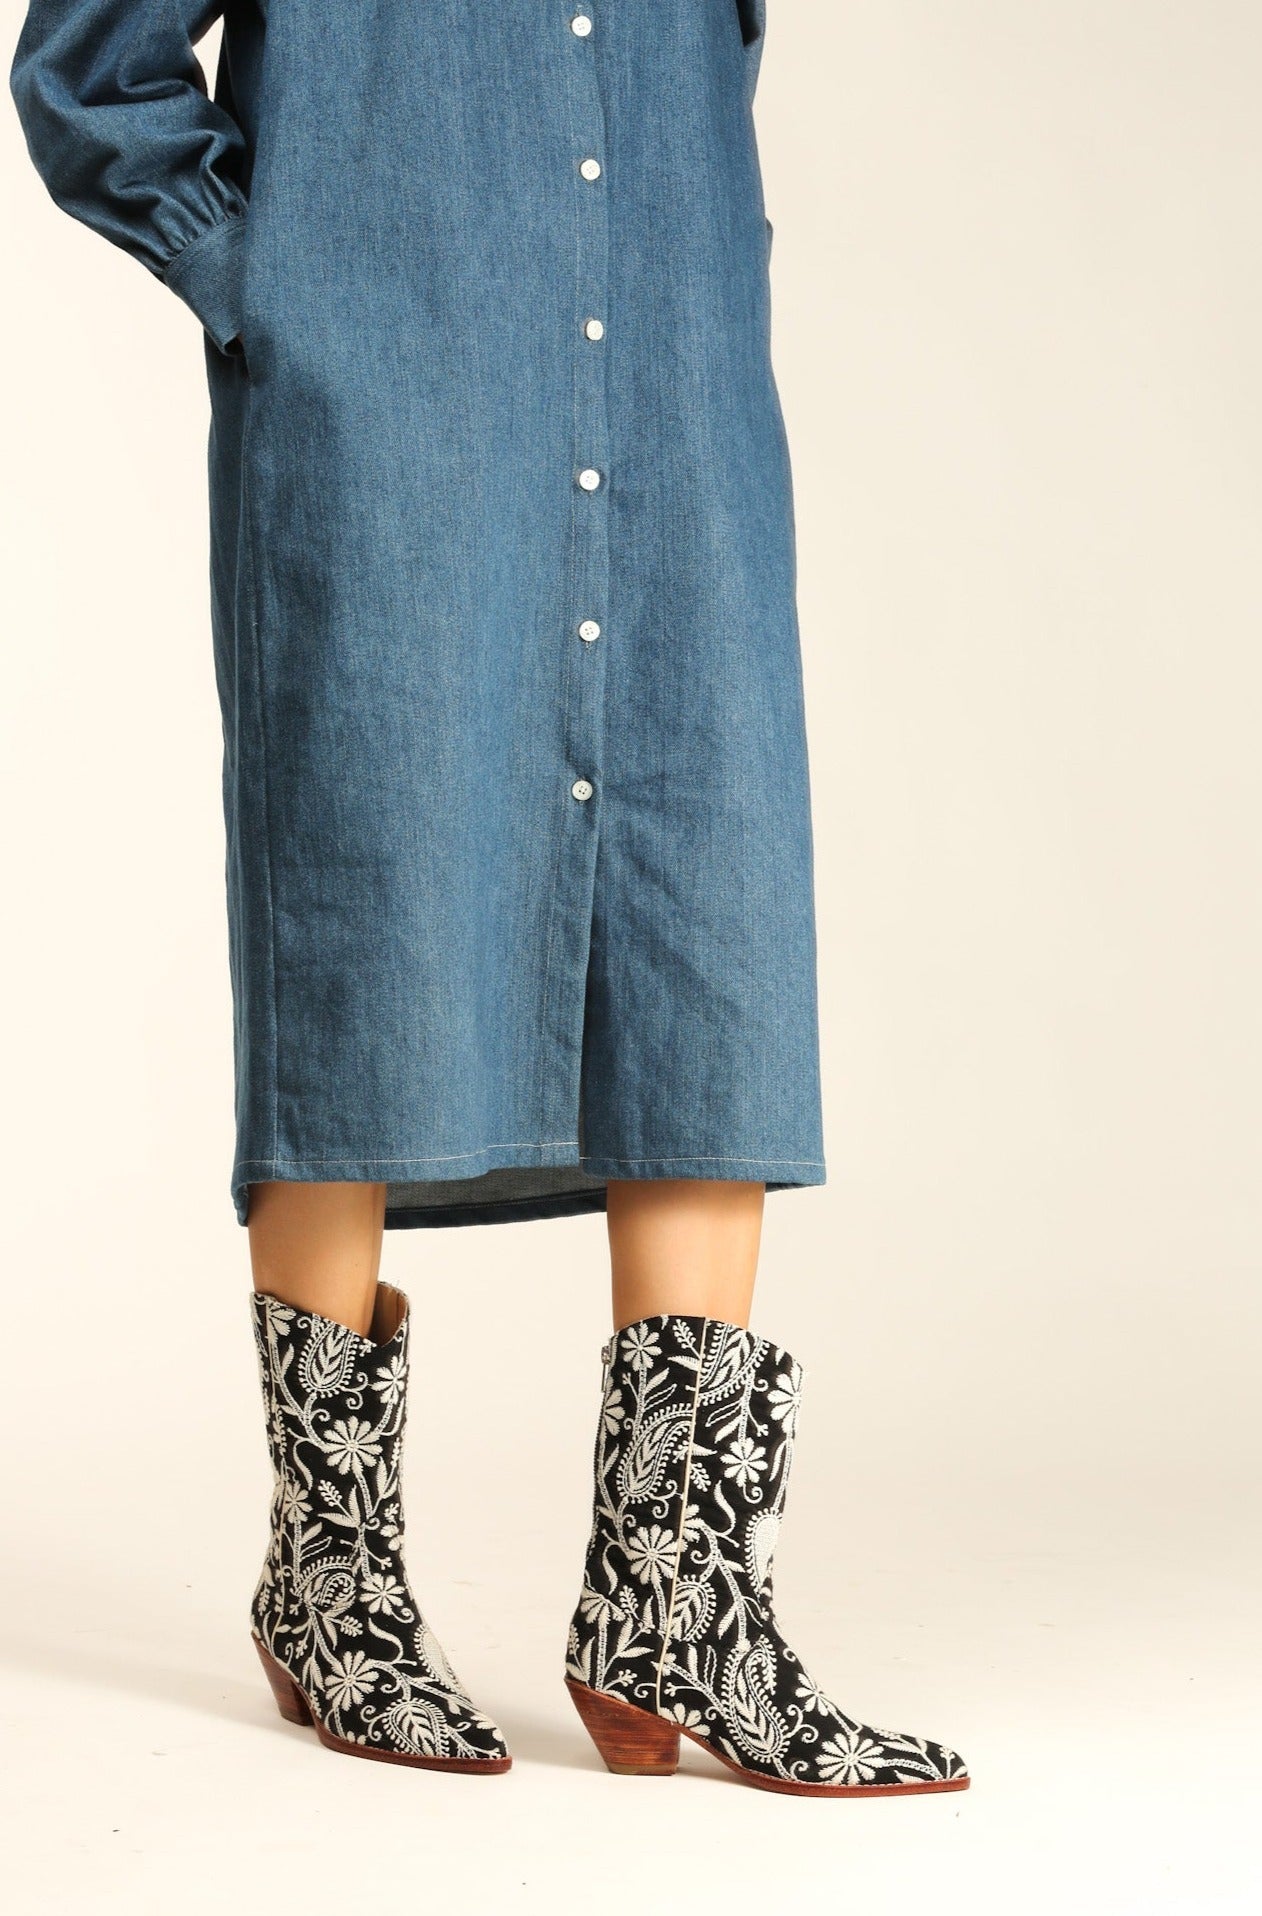 EMBROIDERED WESTERN BOOTS ELLEN - sustainably made MOMO NEW YORK sustainable clothing, boots slow fashion